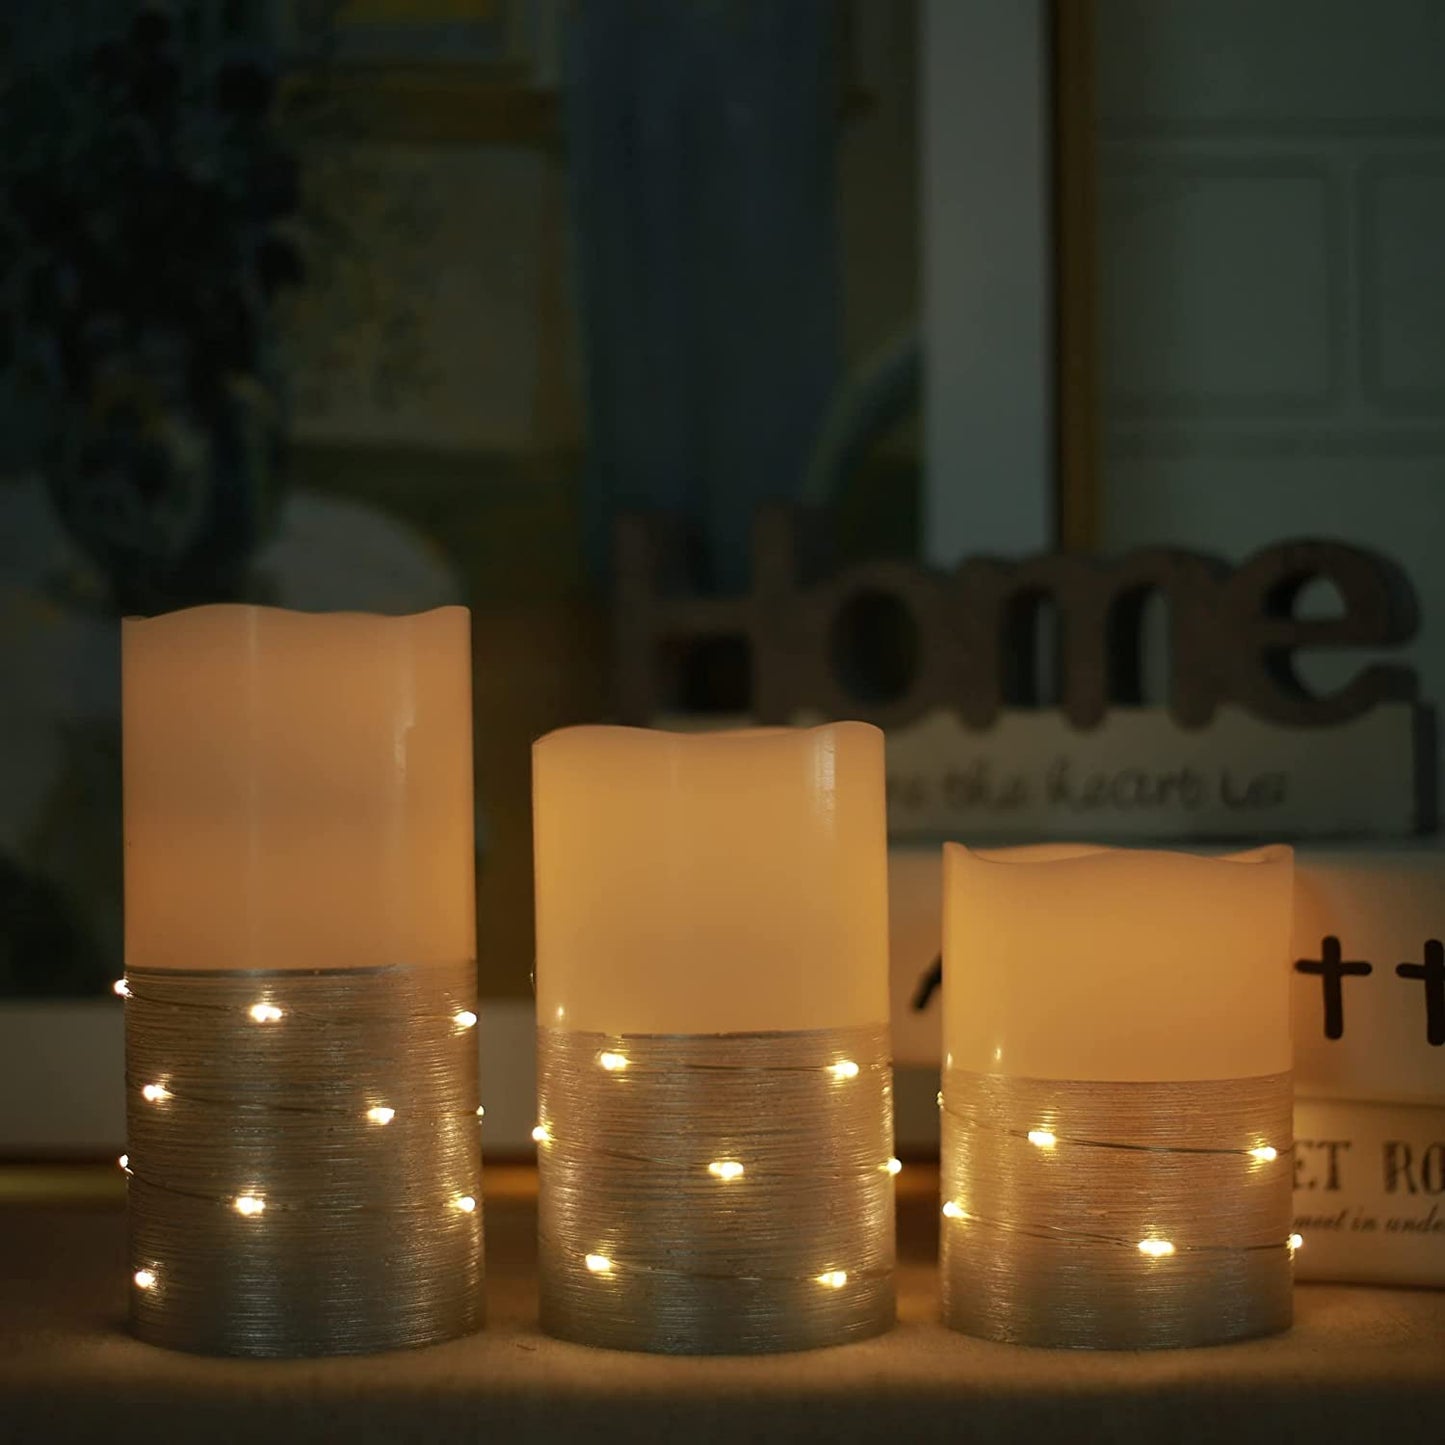 Flameless Candles Ivory Real Wax Pillar with Embedded String Lights H-BLOSSOM LED Candles Battery Operated with Cycling 5H Timer Set of 3 (3" x 4"/5"/6") (Ivory)